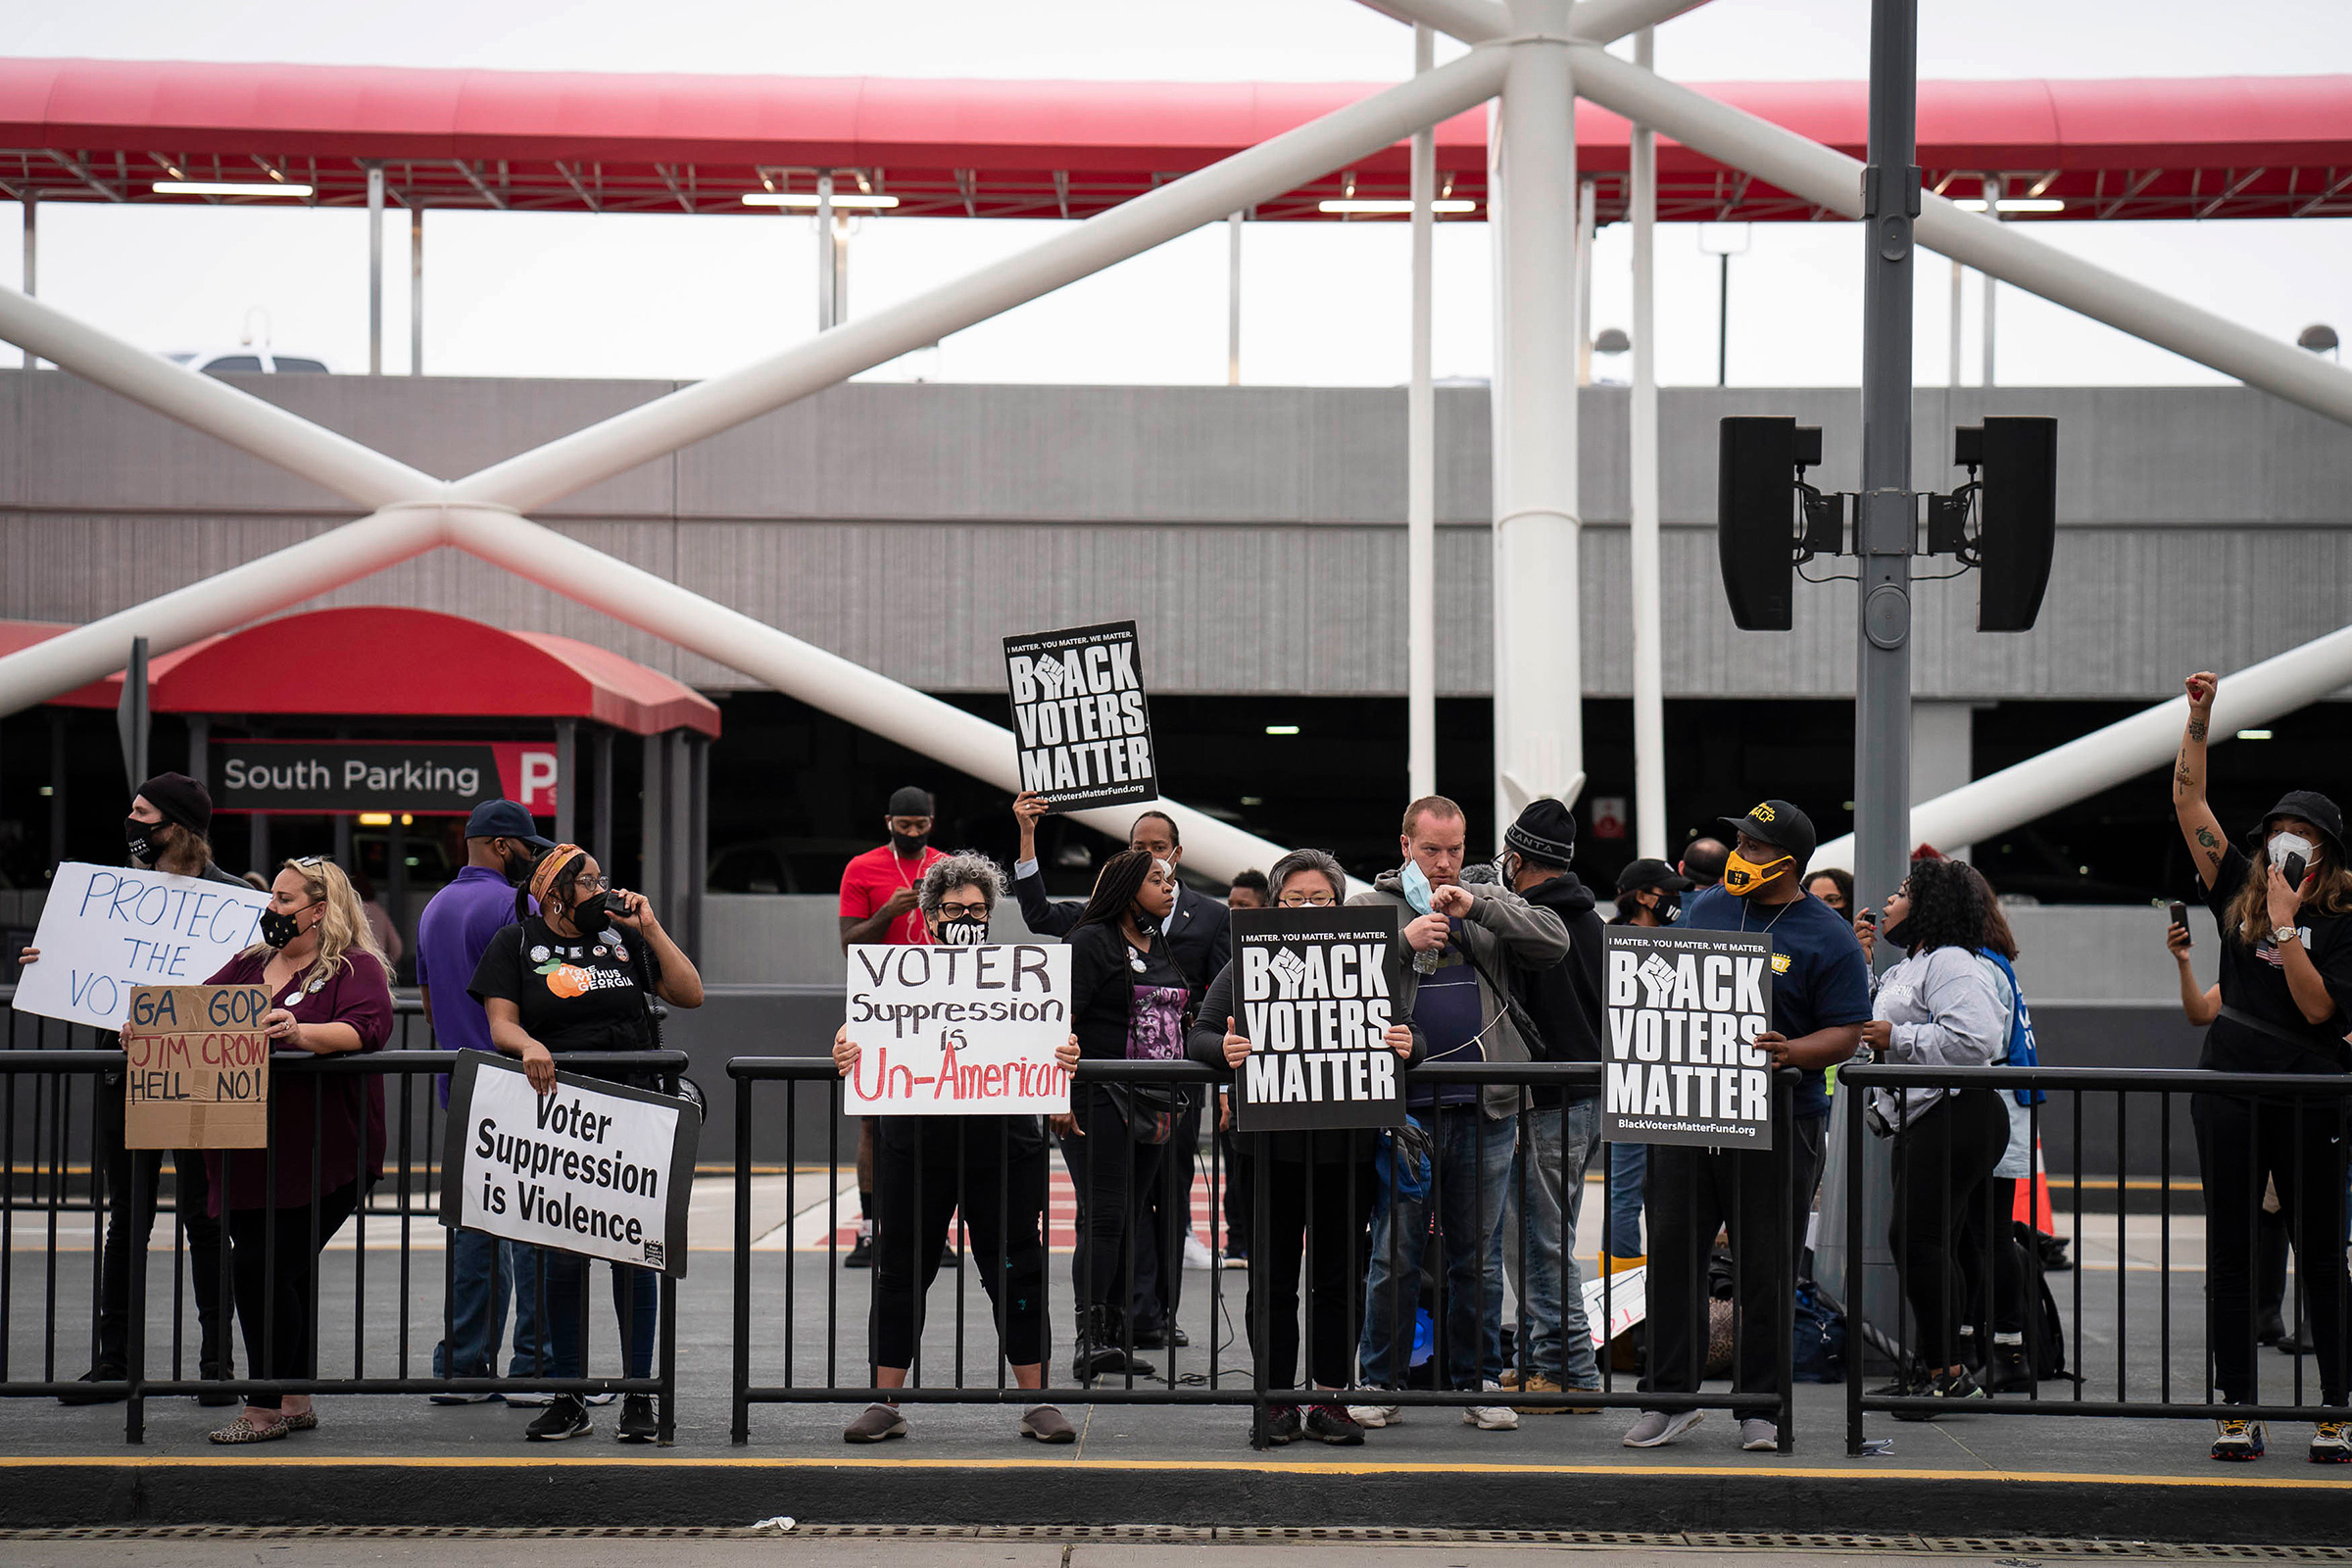 Voting-rights activists call for a boycott of Delta Air Lines during a protest at Hartsfield-Jackson Atlanta International Airport in Atlanta, March 25, 2021. (Nicole Craine—The New York Times/Redux)